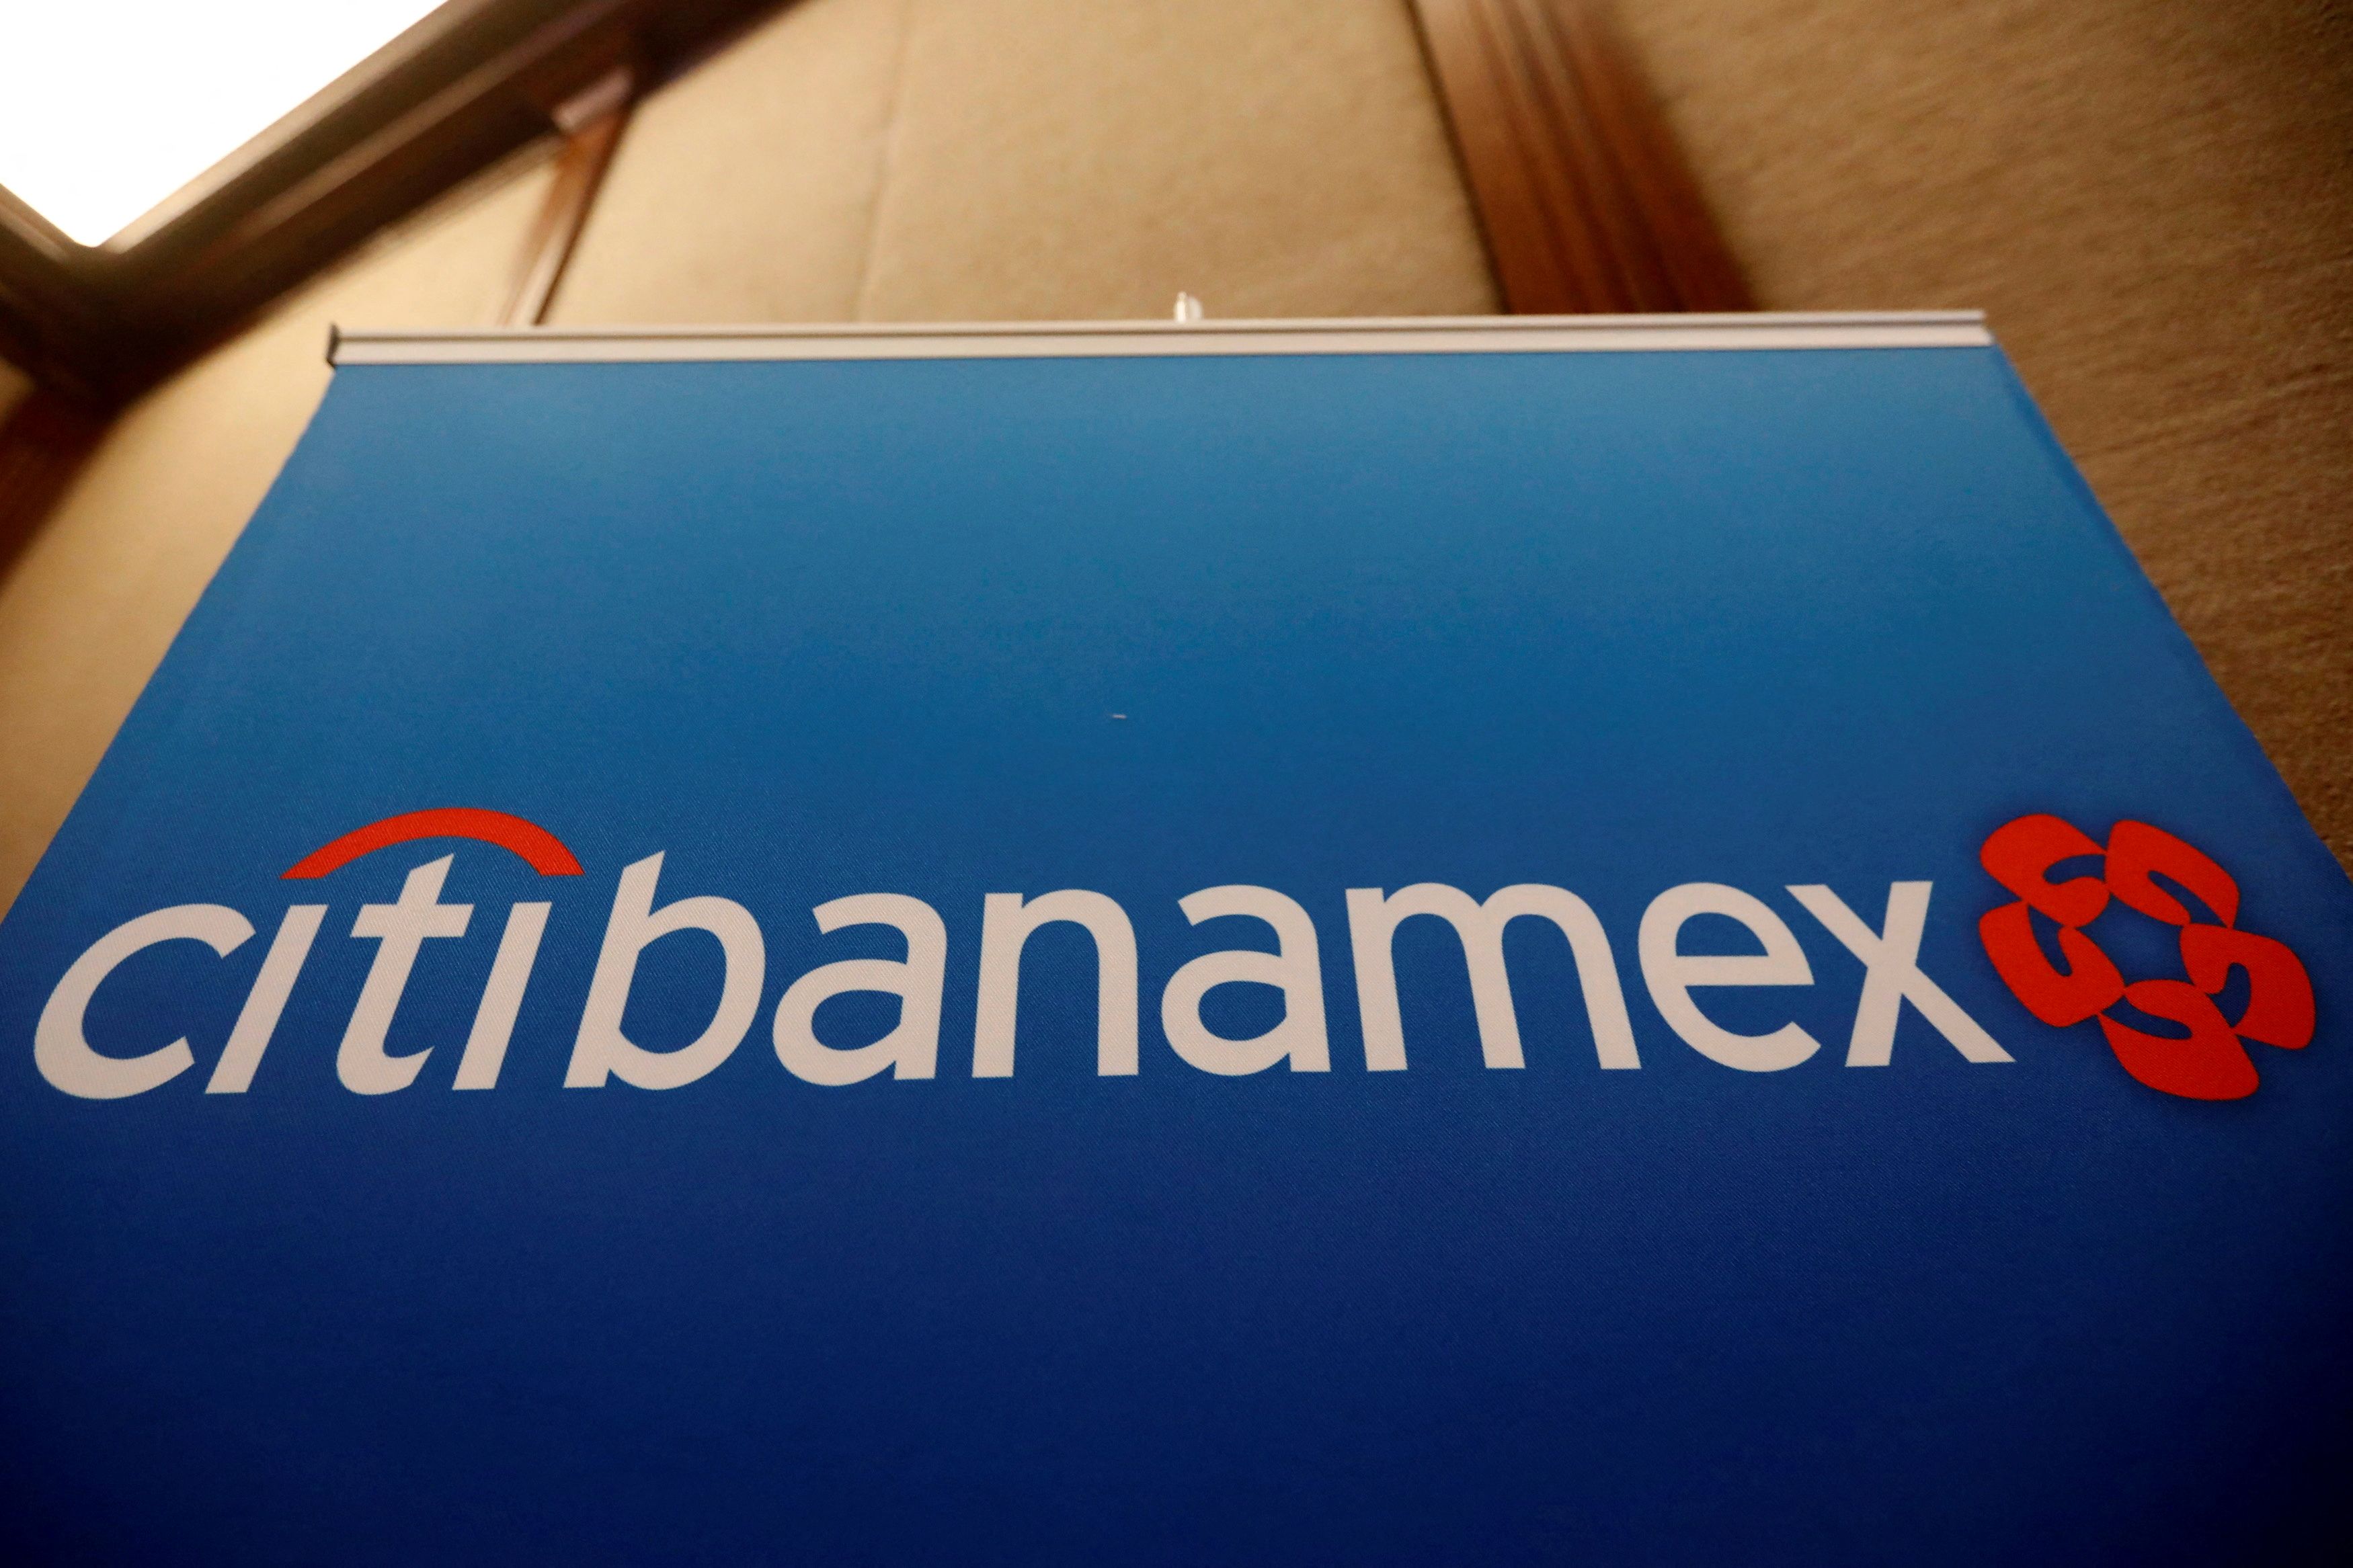 A logo of Citibanamex is pictured in Mexico City